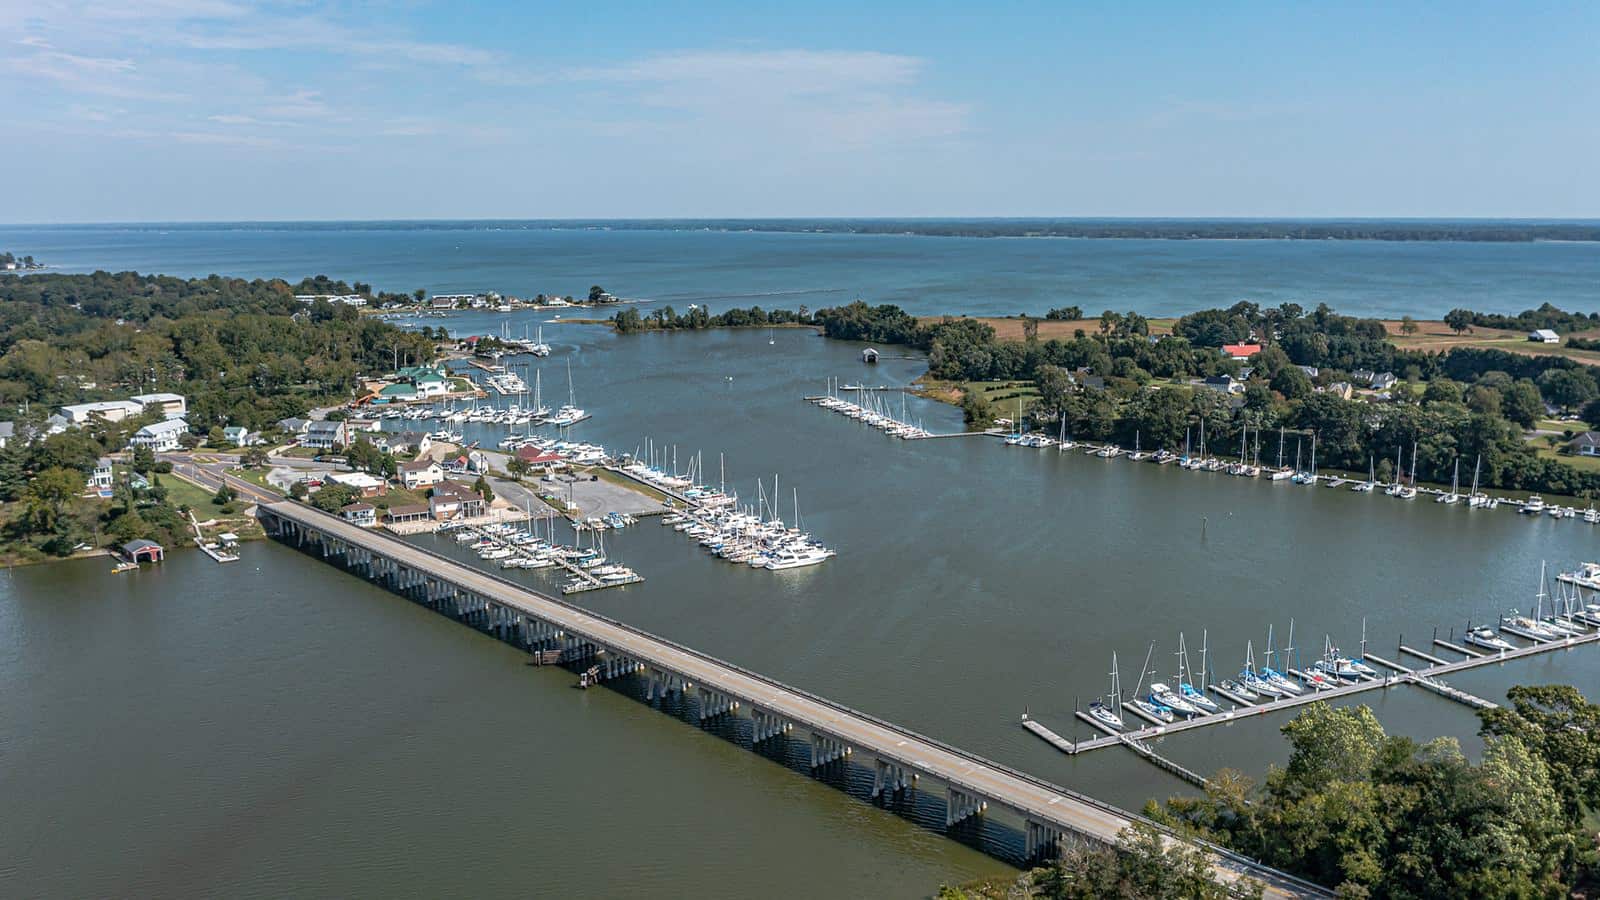 Aerial view of town near the water with multiple harbors and long highway bridge